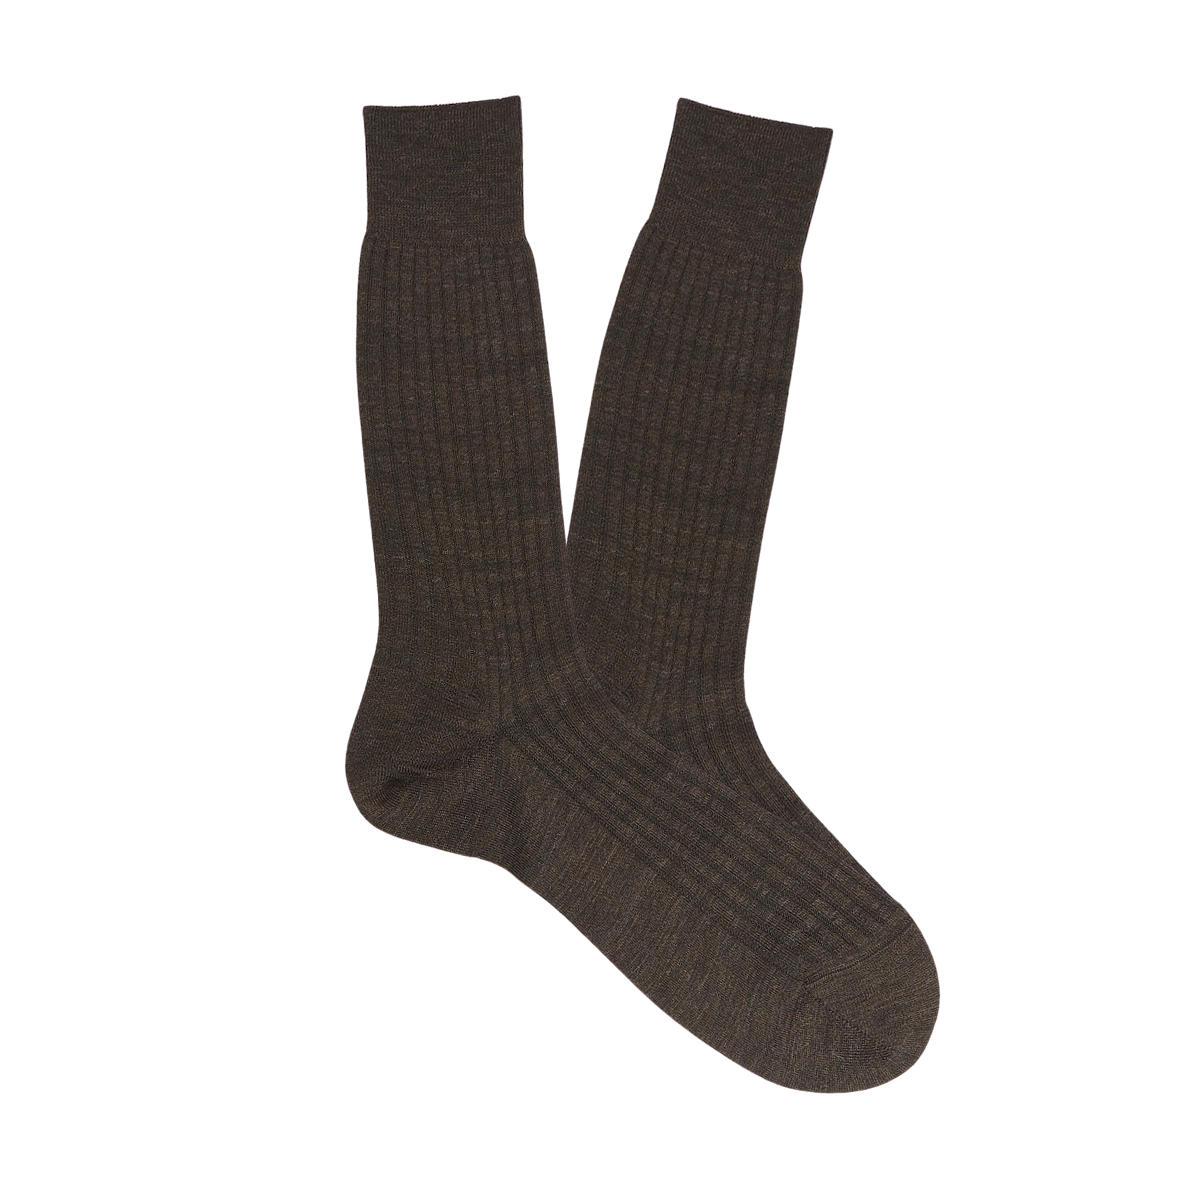 Pantherella Brown Merino Wool Ribbed Ankle Socks Feature